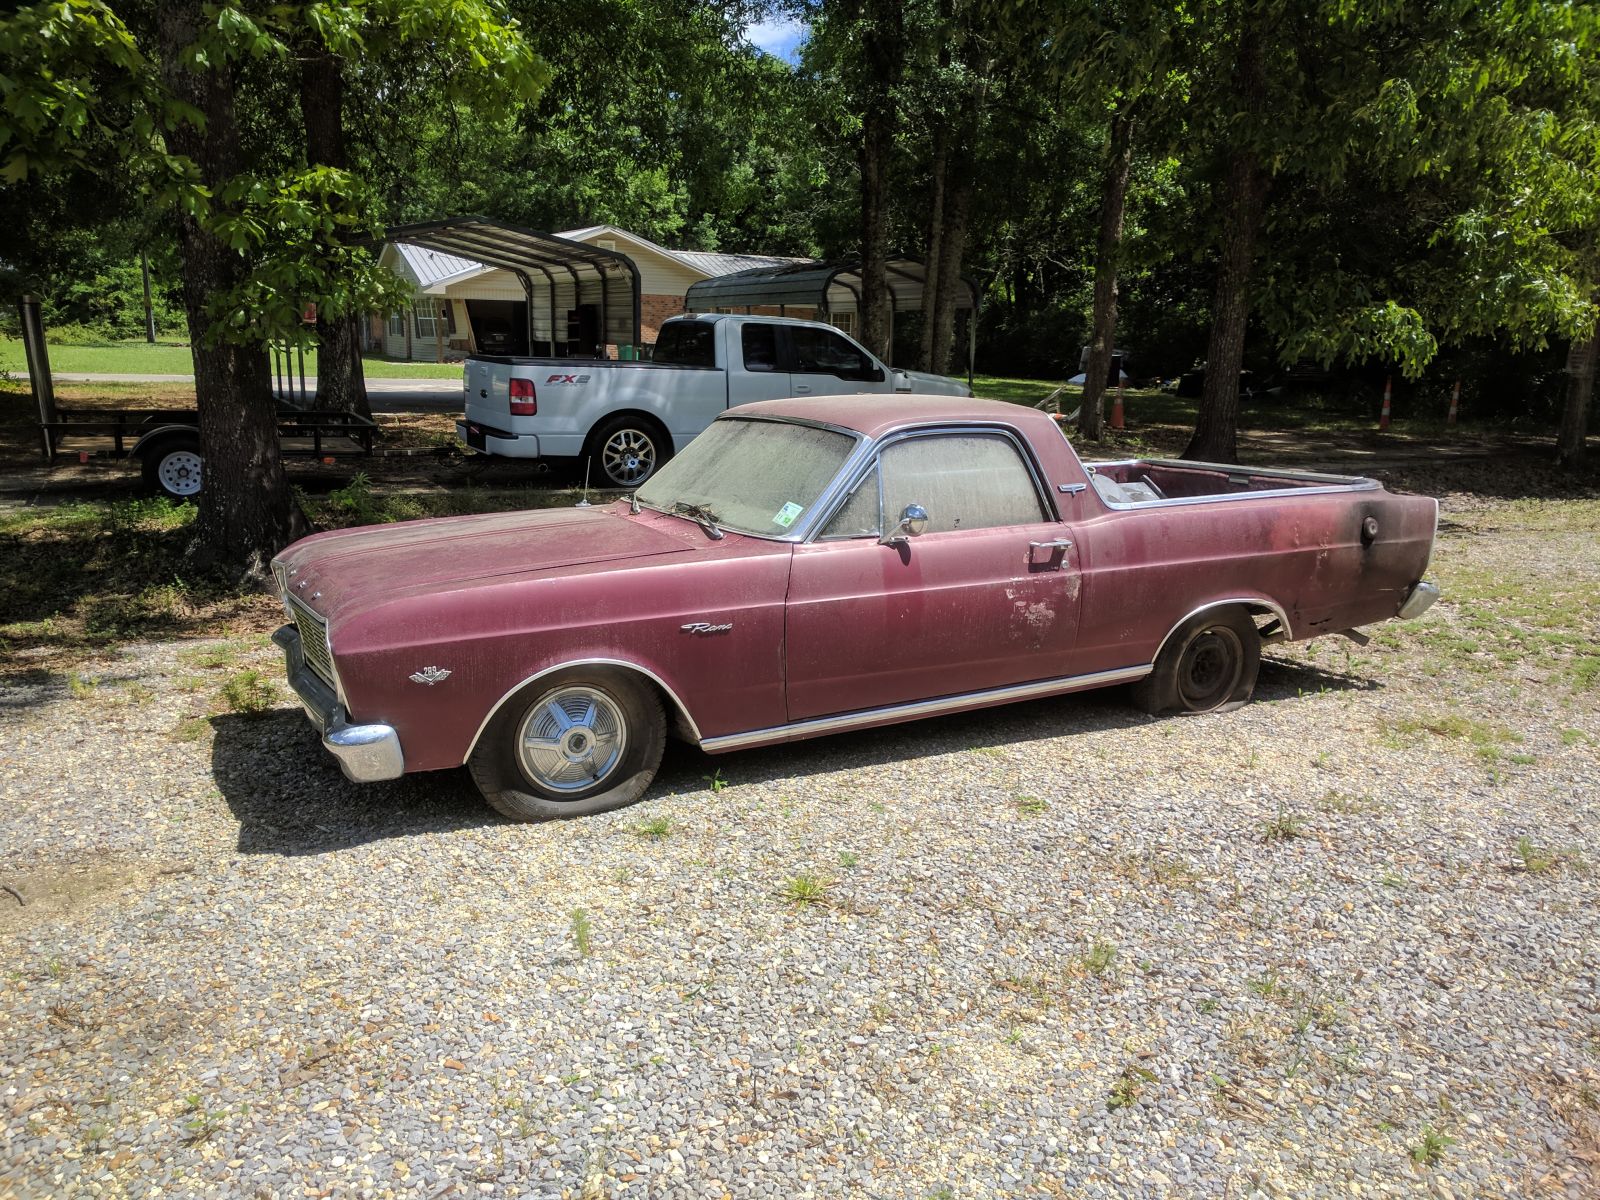 Illustration for article titled May have found my next project, 1966 Ranchero 289 v8 A/C 1 year only body style. A little rust in the quarter panels. I think this is a very rare find. negotiating price with owner, whats it worth? Ran when parked LOL